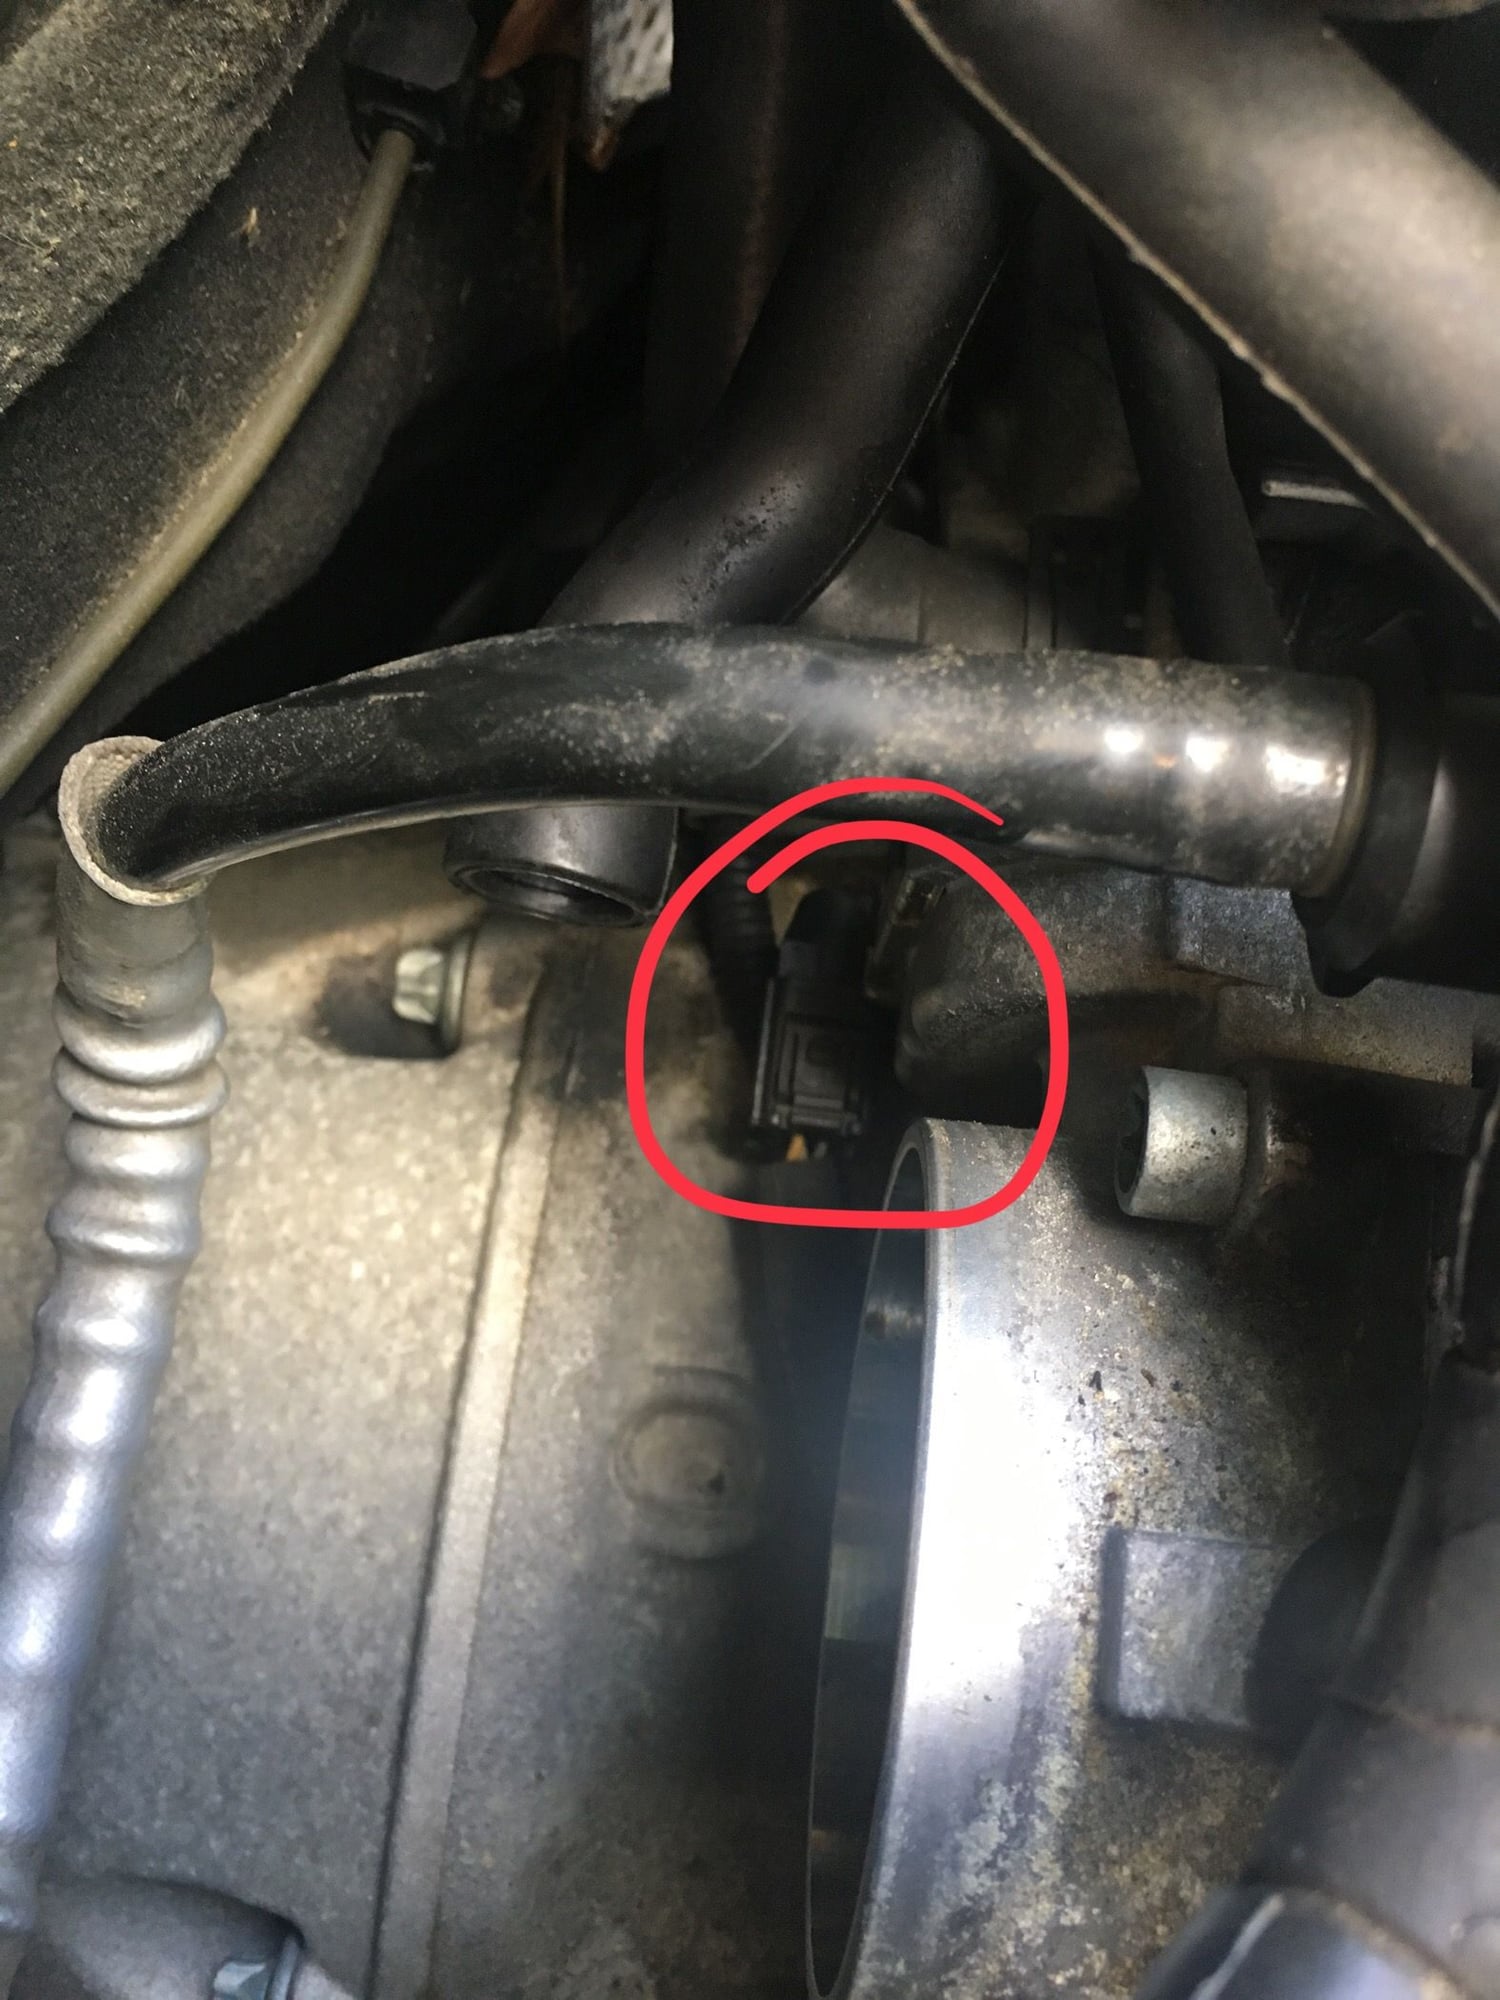 How to disconnect the camshaft position sensor? - MBWorld.org Forums